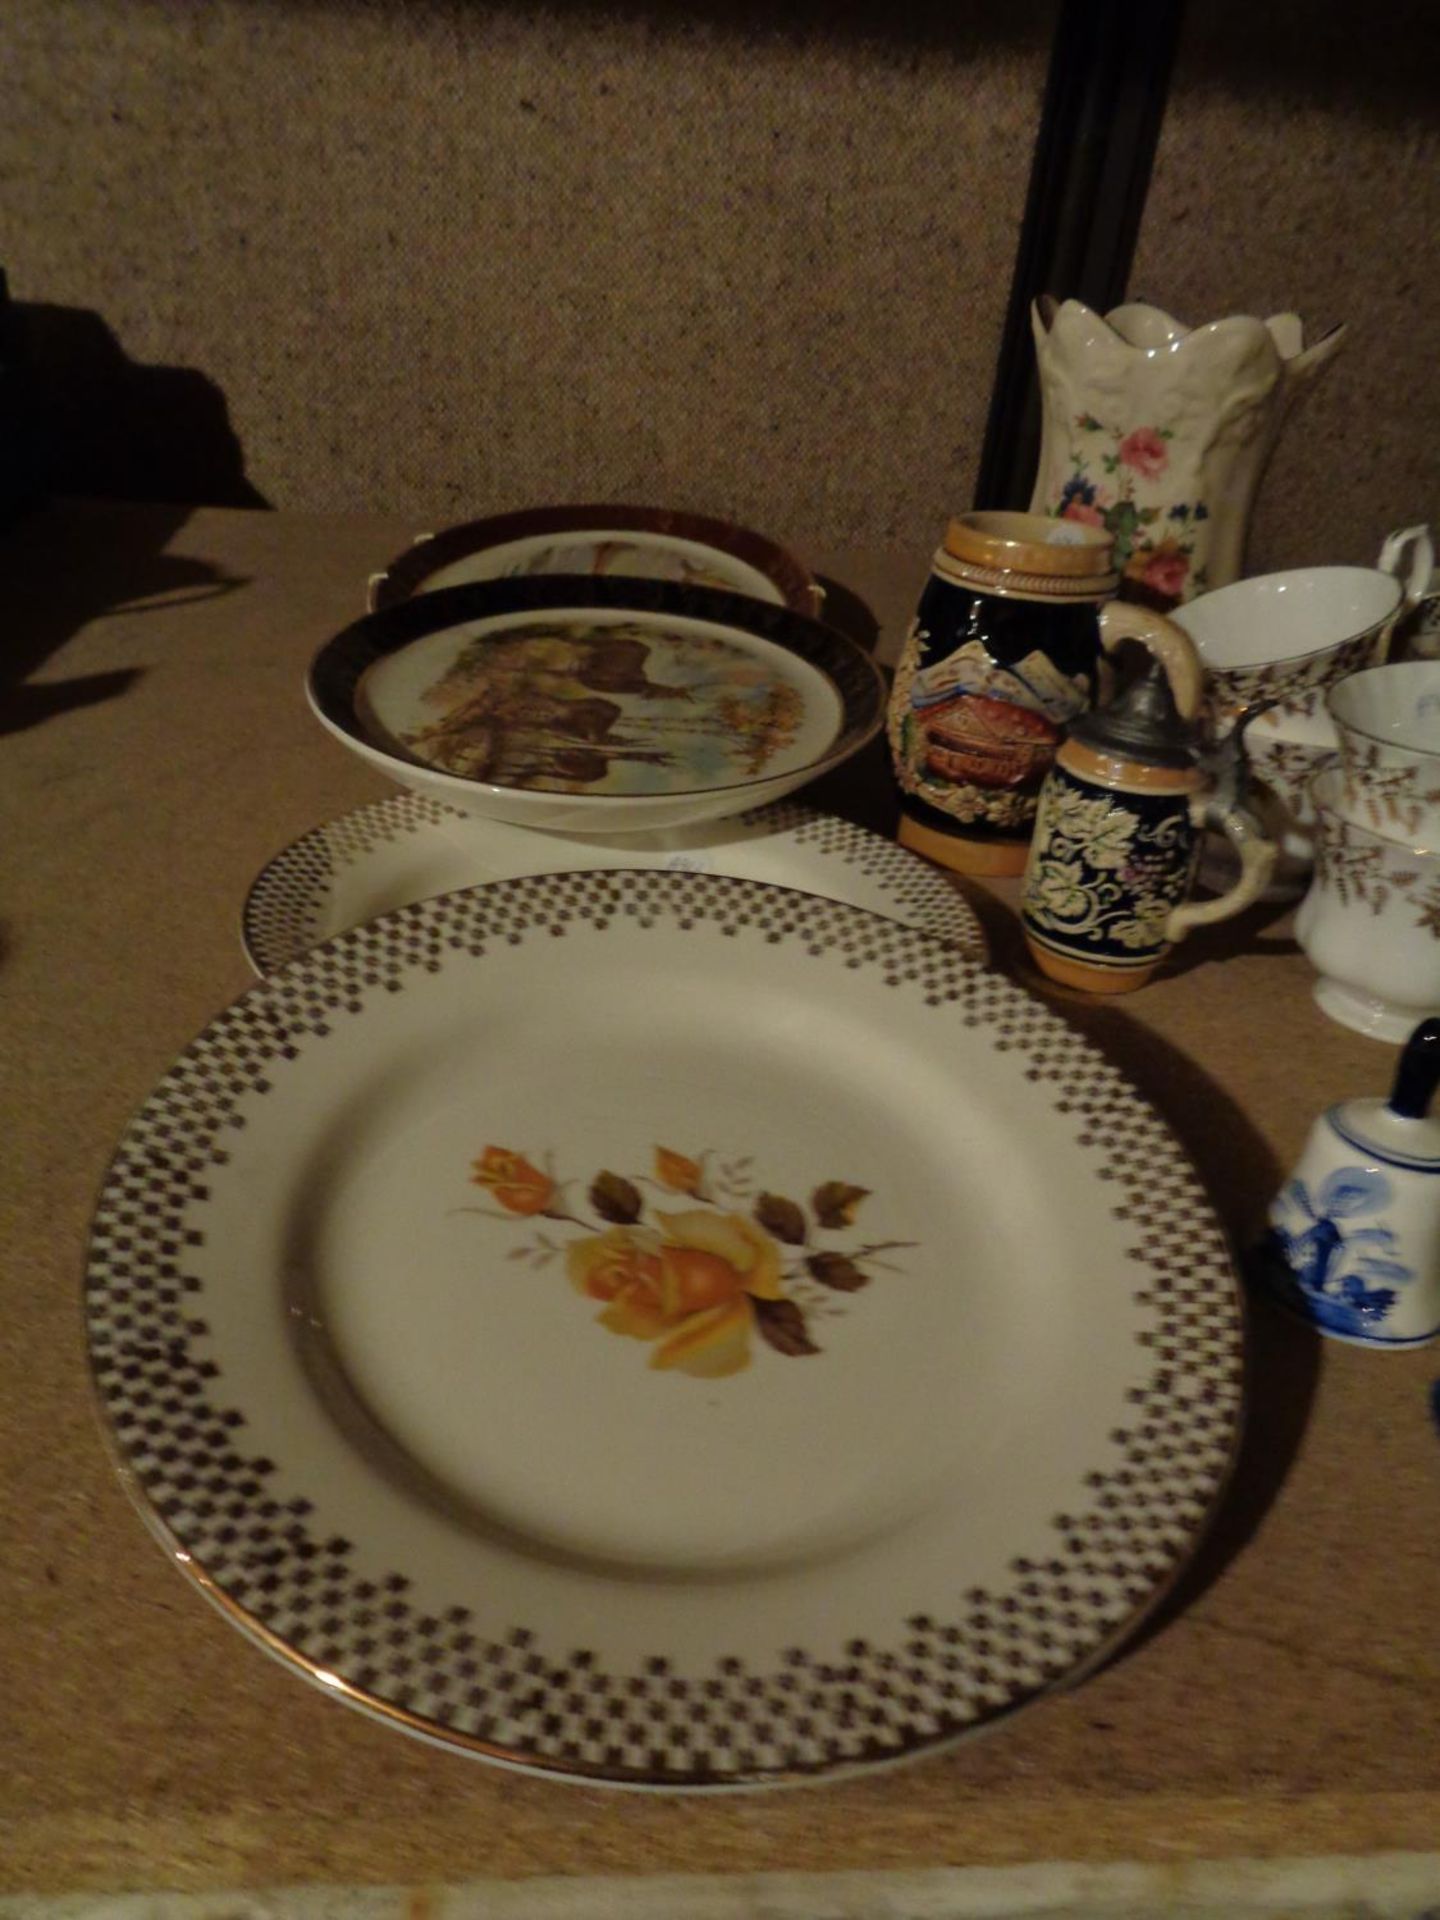 A SELECTION OF CHINA TEA WARE PARAGON 'BRIDAL ROSE', DECORATIVE PLATES, BLUE AND WHITE ETC - Image 4 of 4